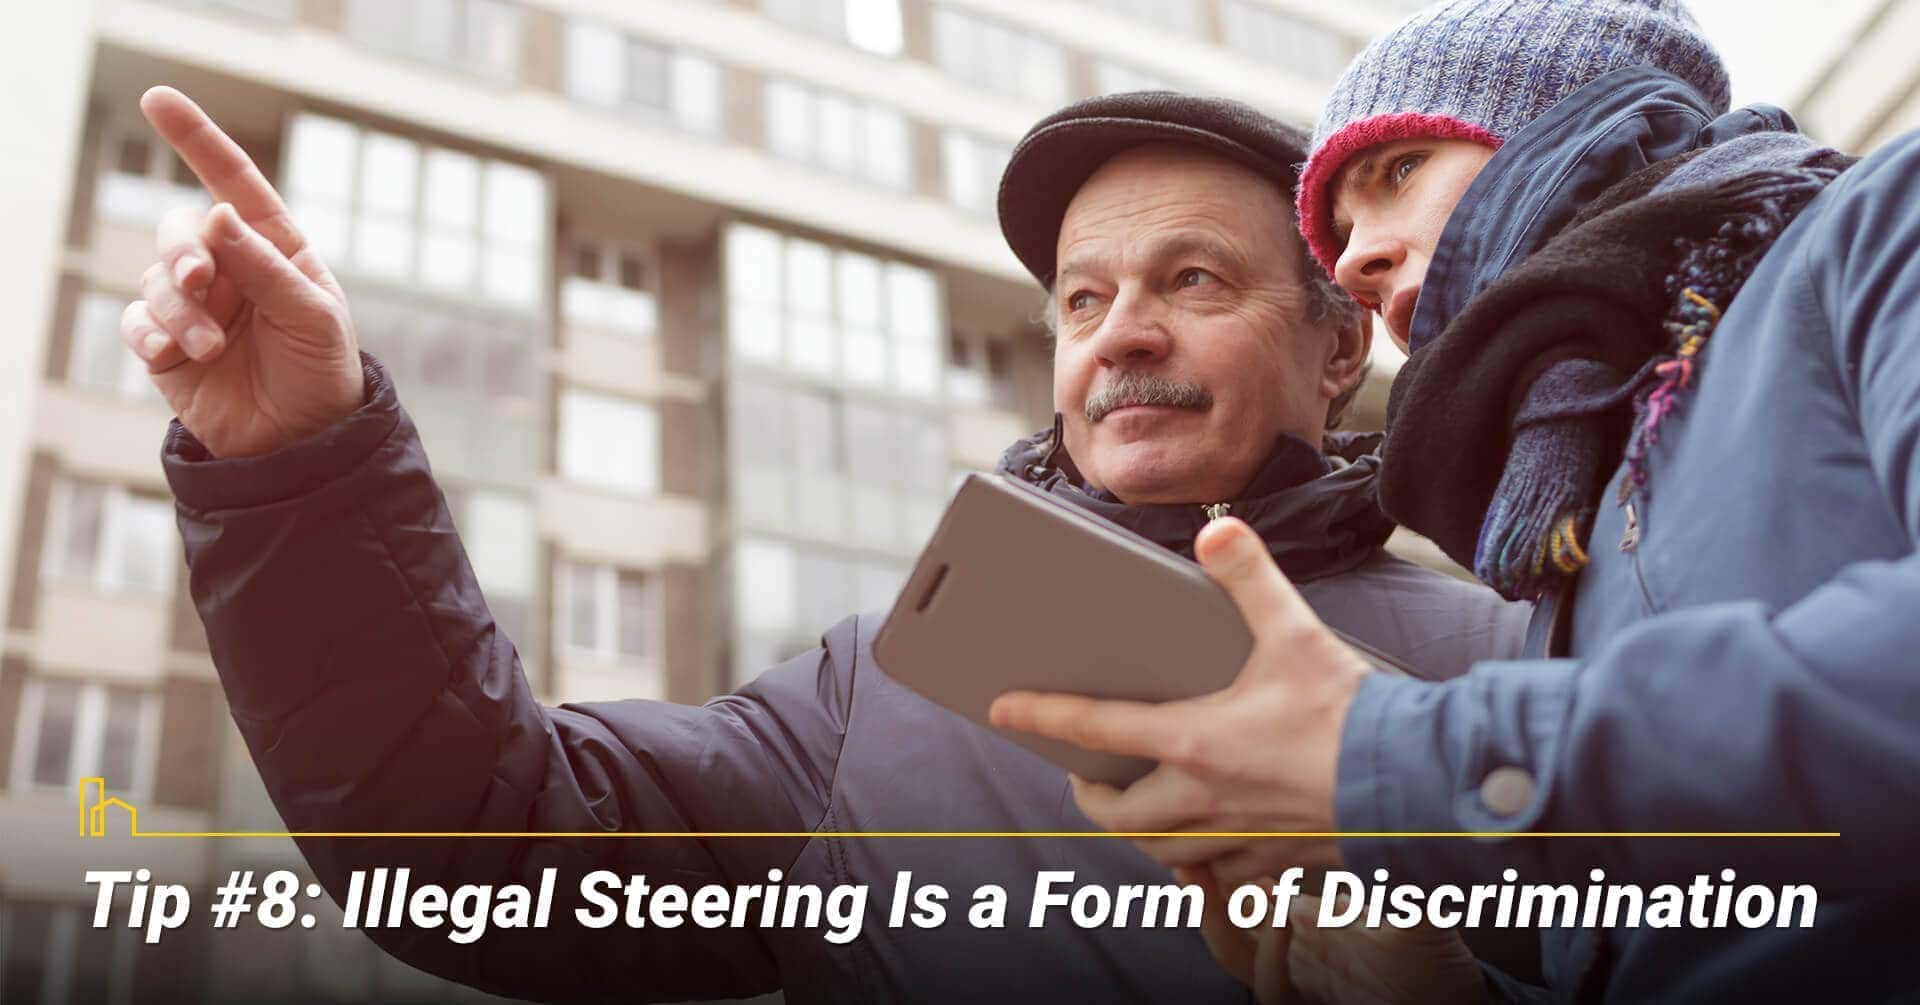 Tip #8: Illegal Steering Is a Form of Discrimination, beware of discrimination acts